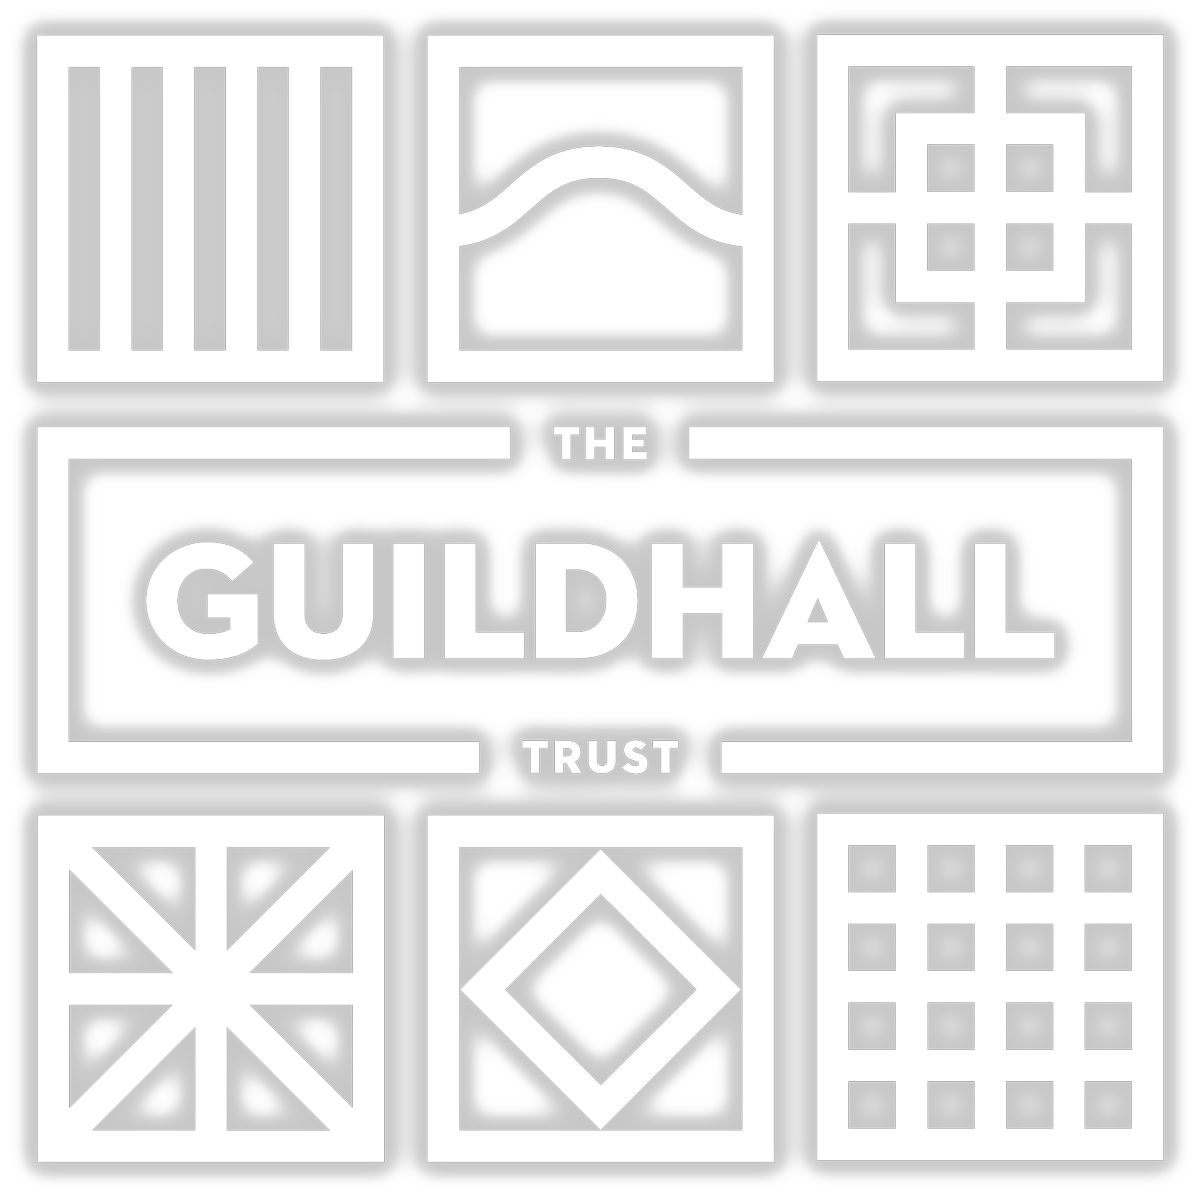 Cultural consultancy at the Guildhall Trust.